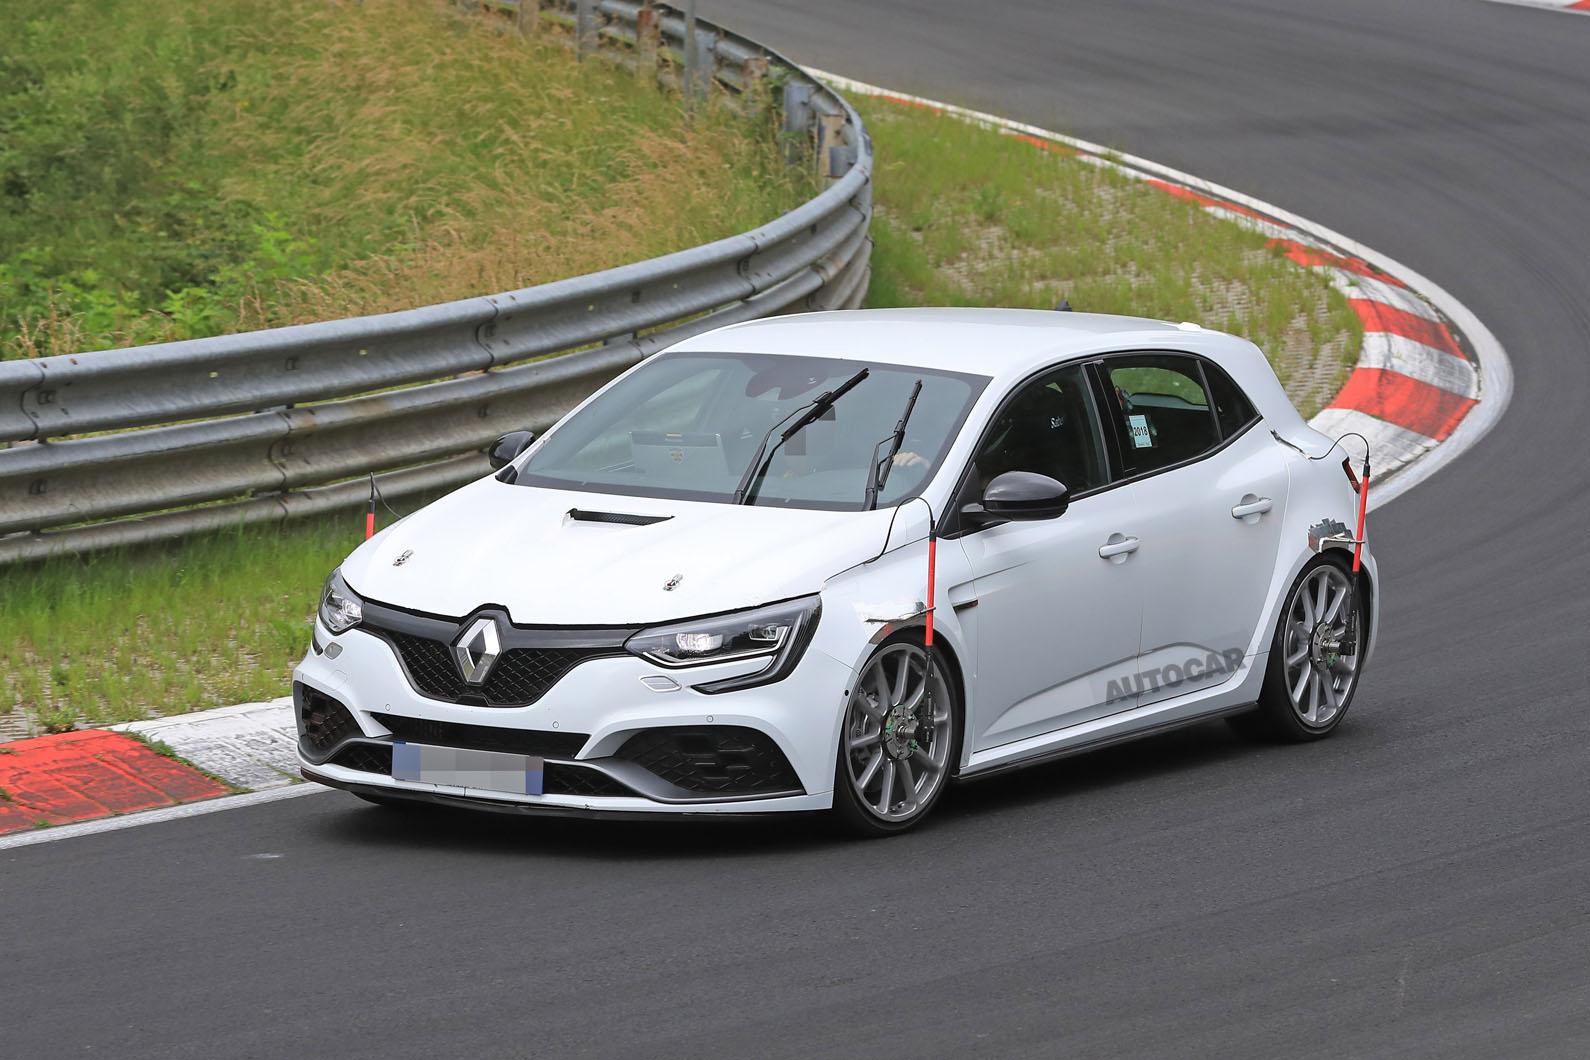 Renault Megane RS 300 to go for for FWD Nurburgring |